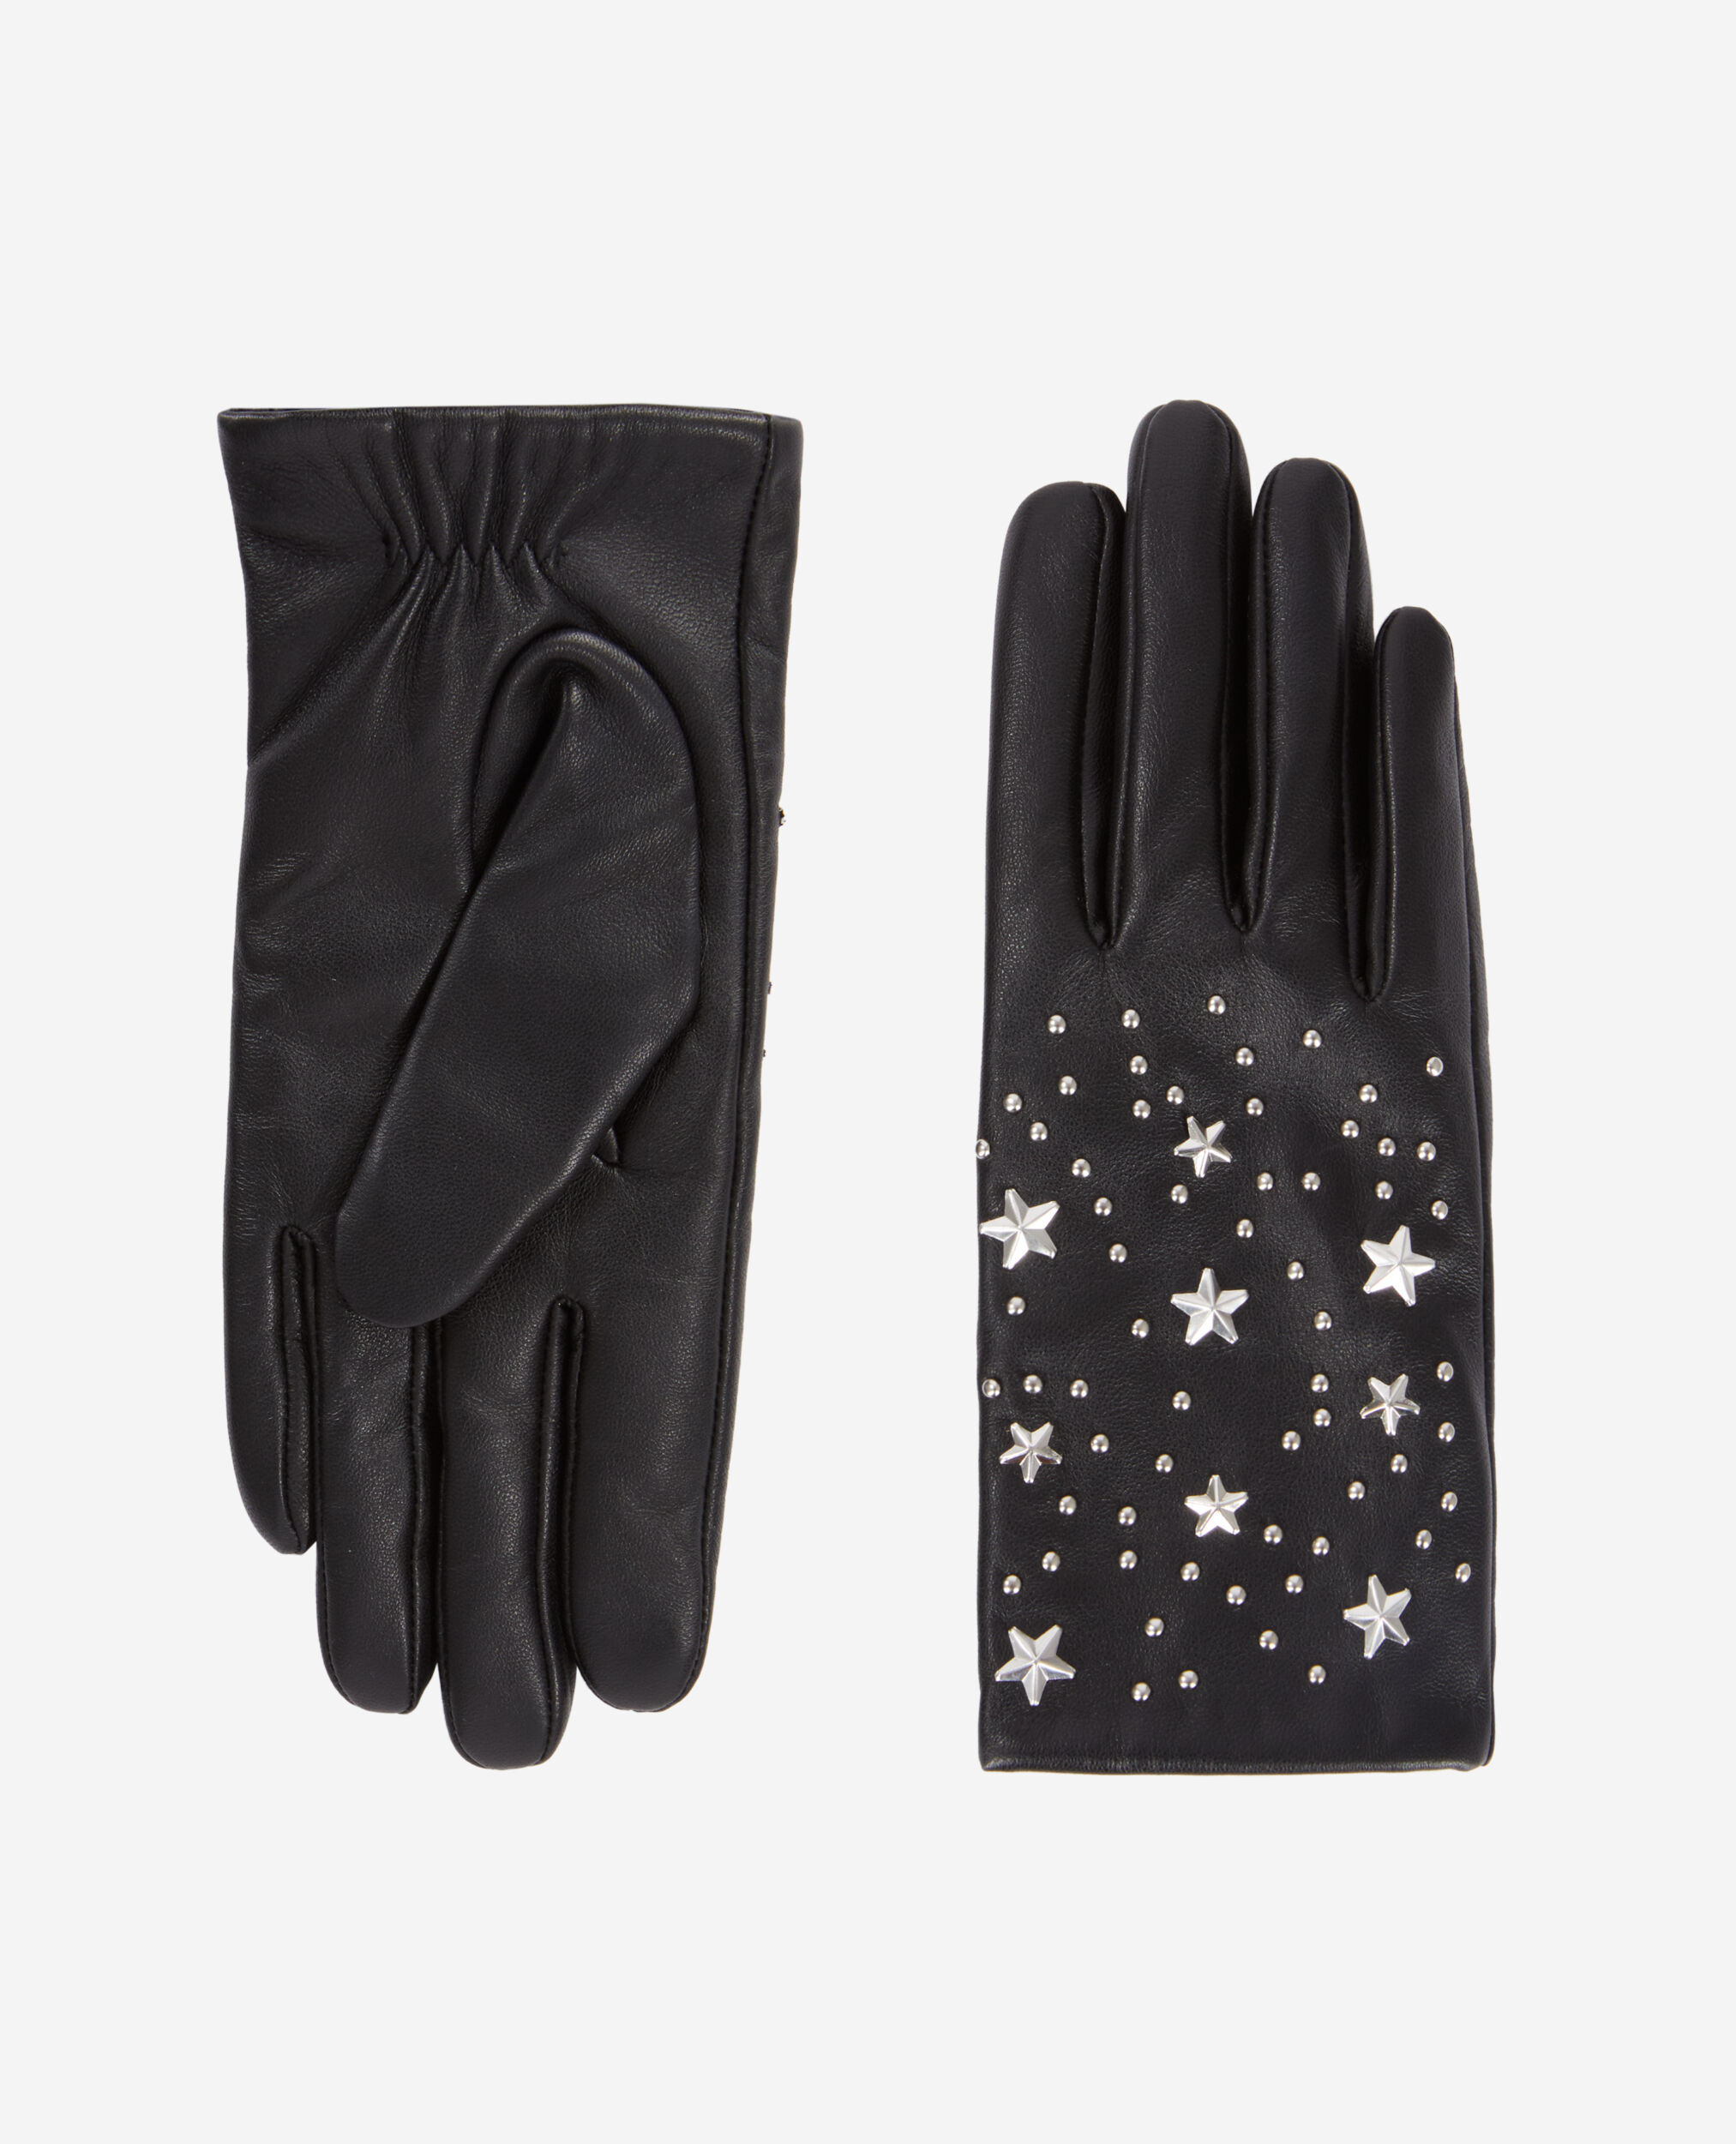 Women's black leather gloves with stars, BLACK, hi-res image number null